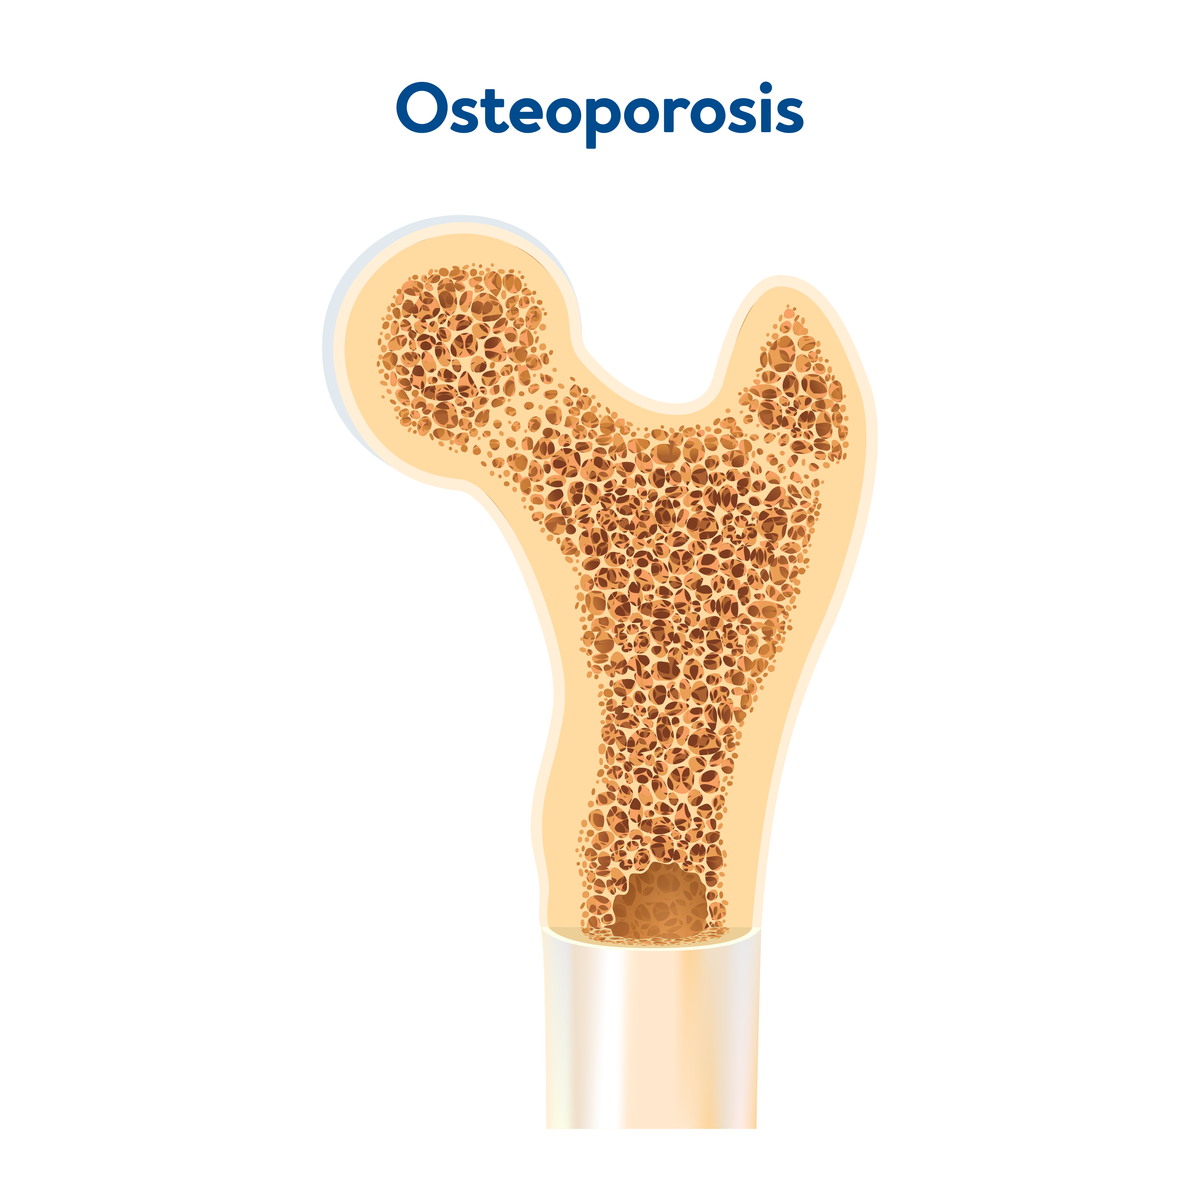 A graphic showing osteoporosis bone density